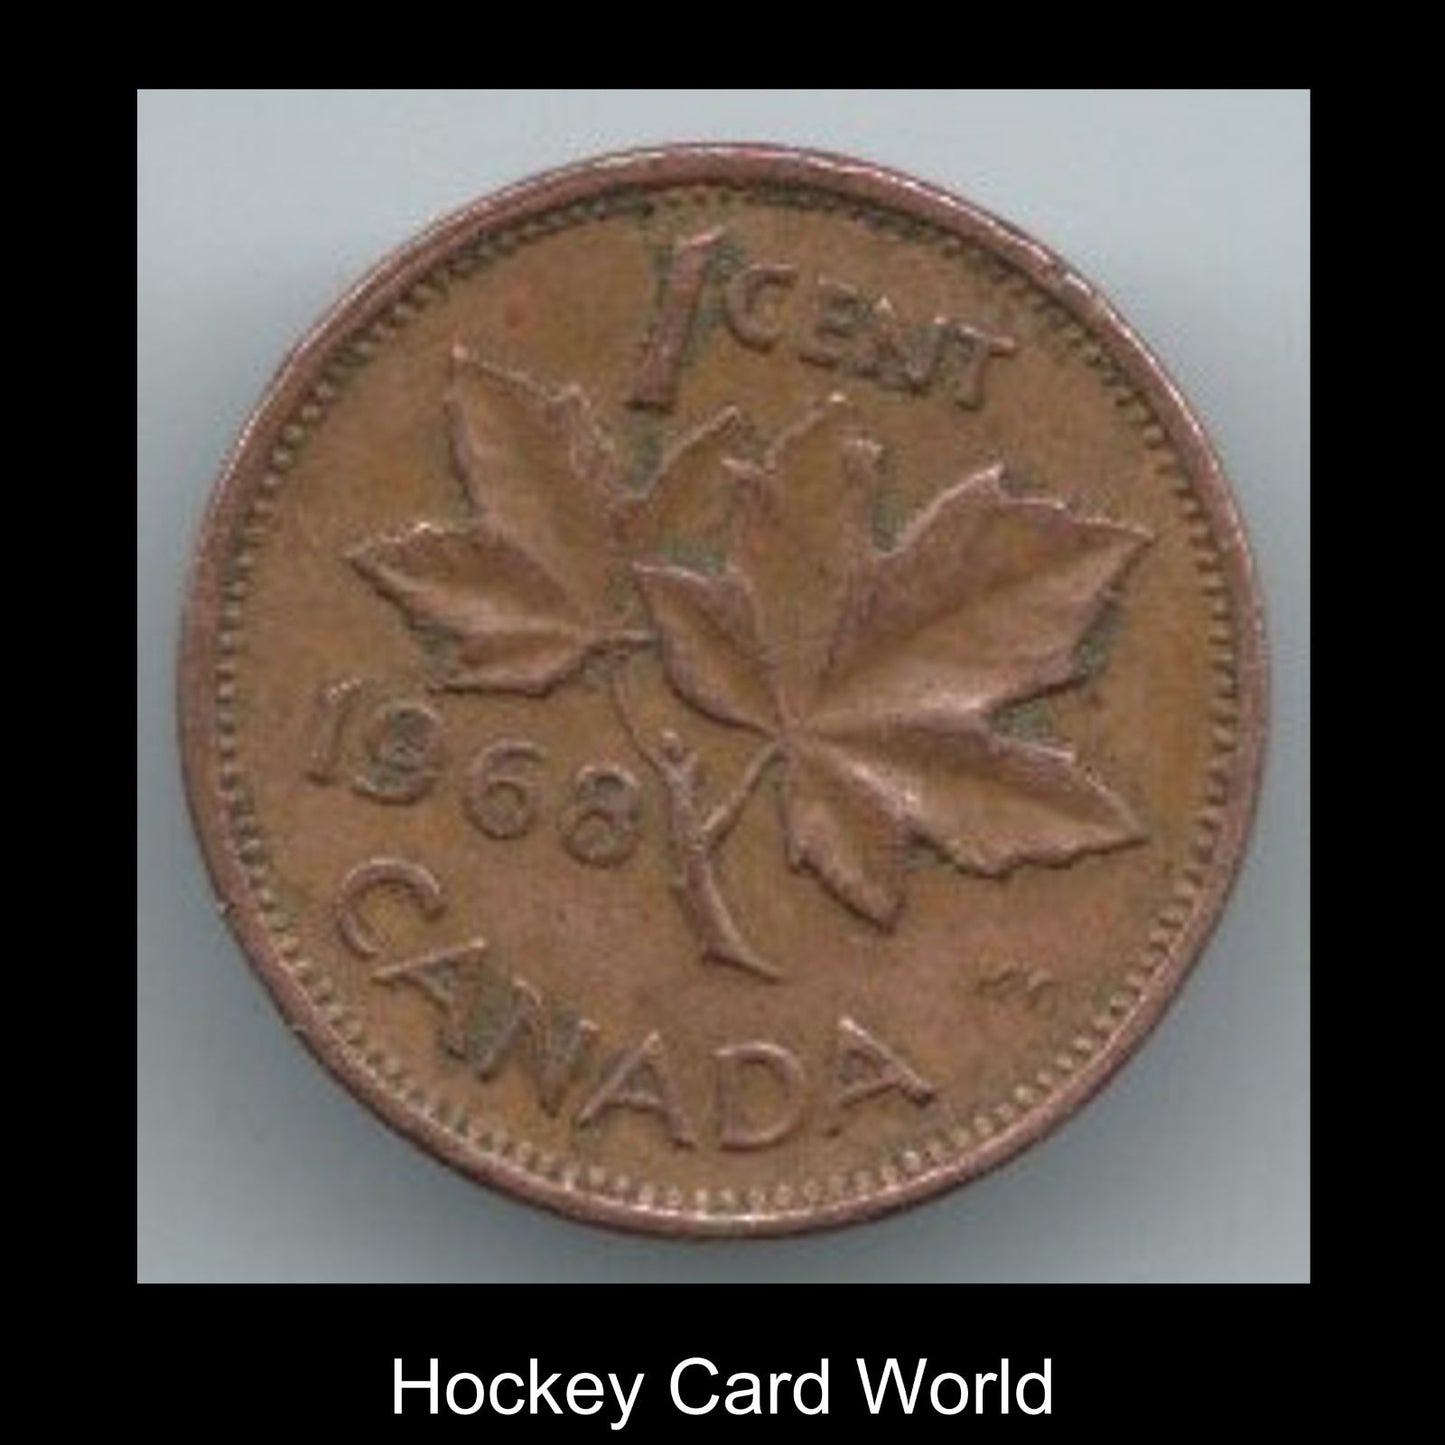  1968 Canadian 1 Cent Penny Coin Canada - Uncirculated Now *8002 Image 1